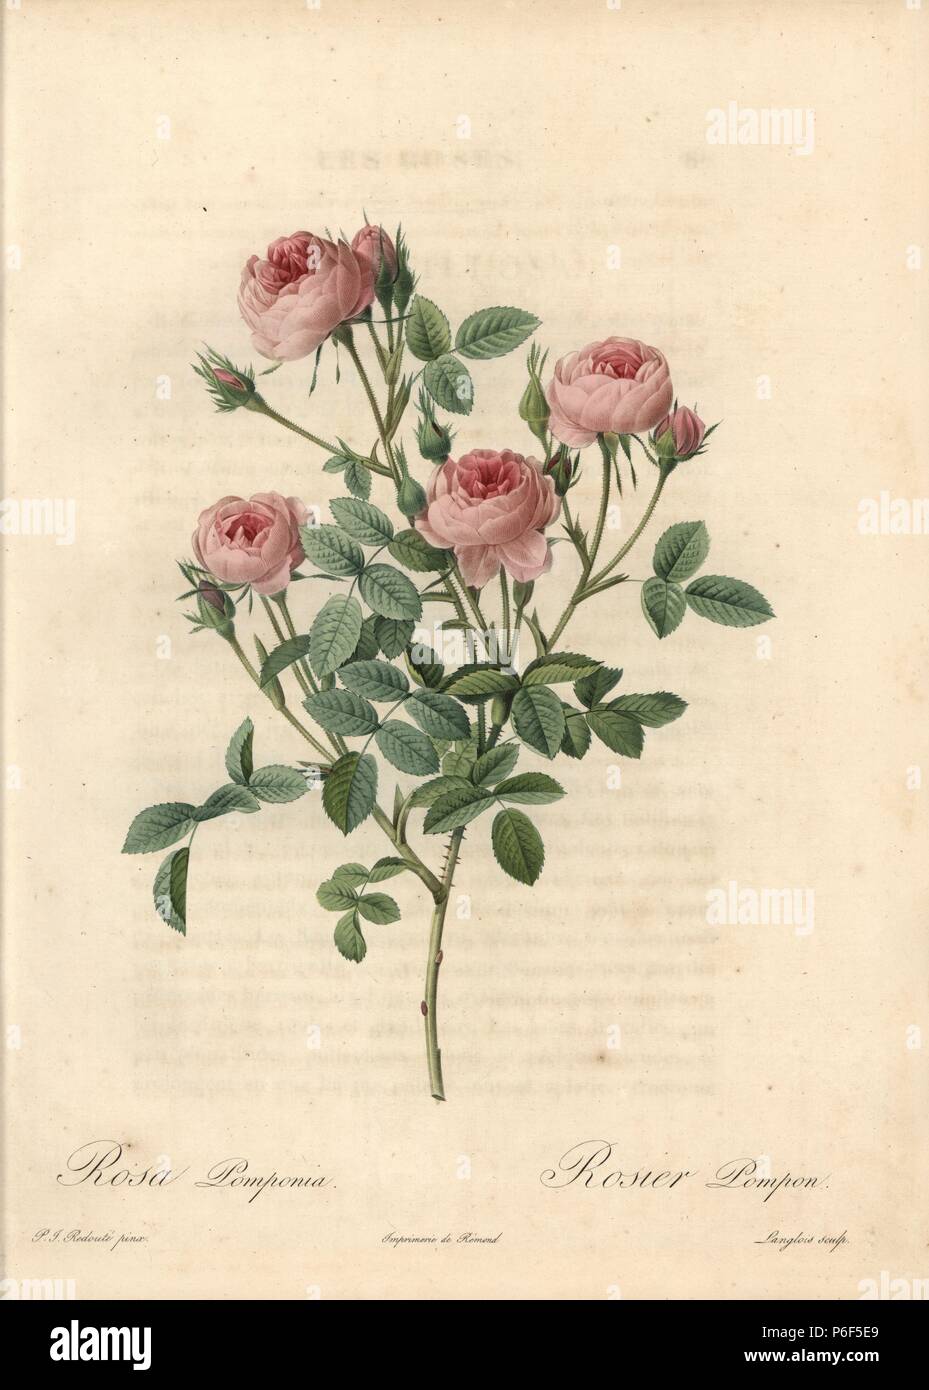 Rose de Meaux rose, centifolia de Meaux pomponia). Handcoloured stipple copperplate engraving by Langlois after an illustration by Pierre-Joseph Redoute from "Les Roses," Firmin Didot, Paris, 1817 Stock Photo